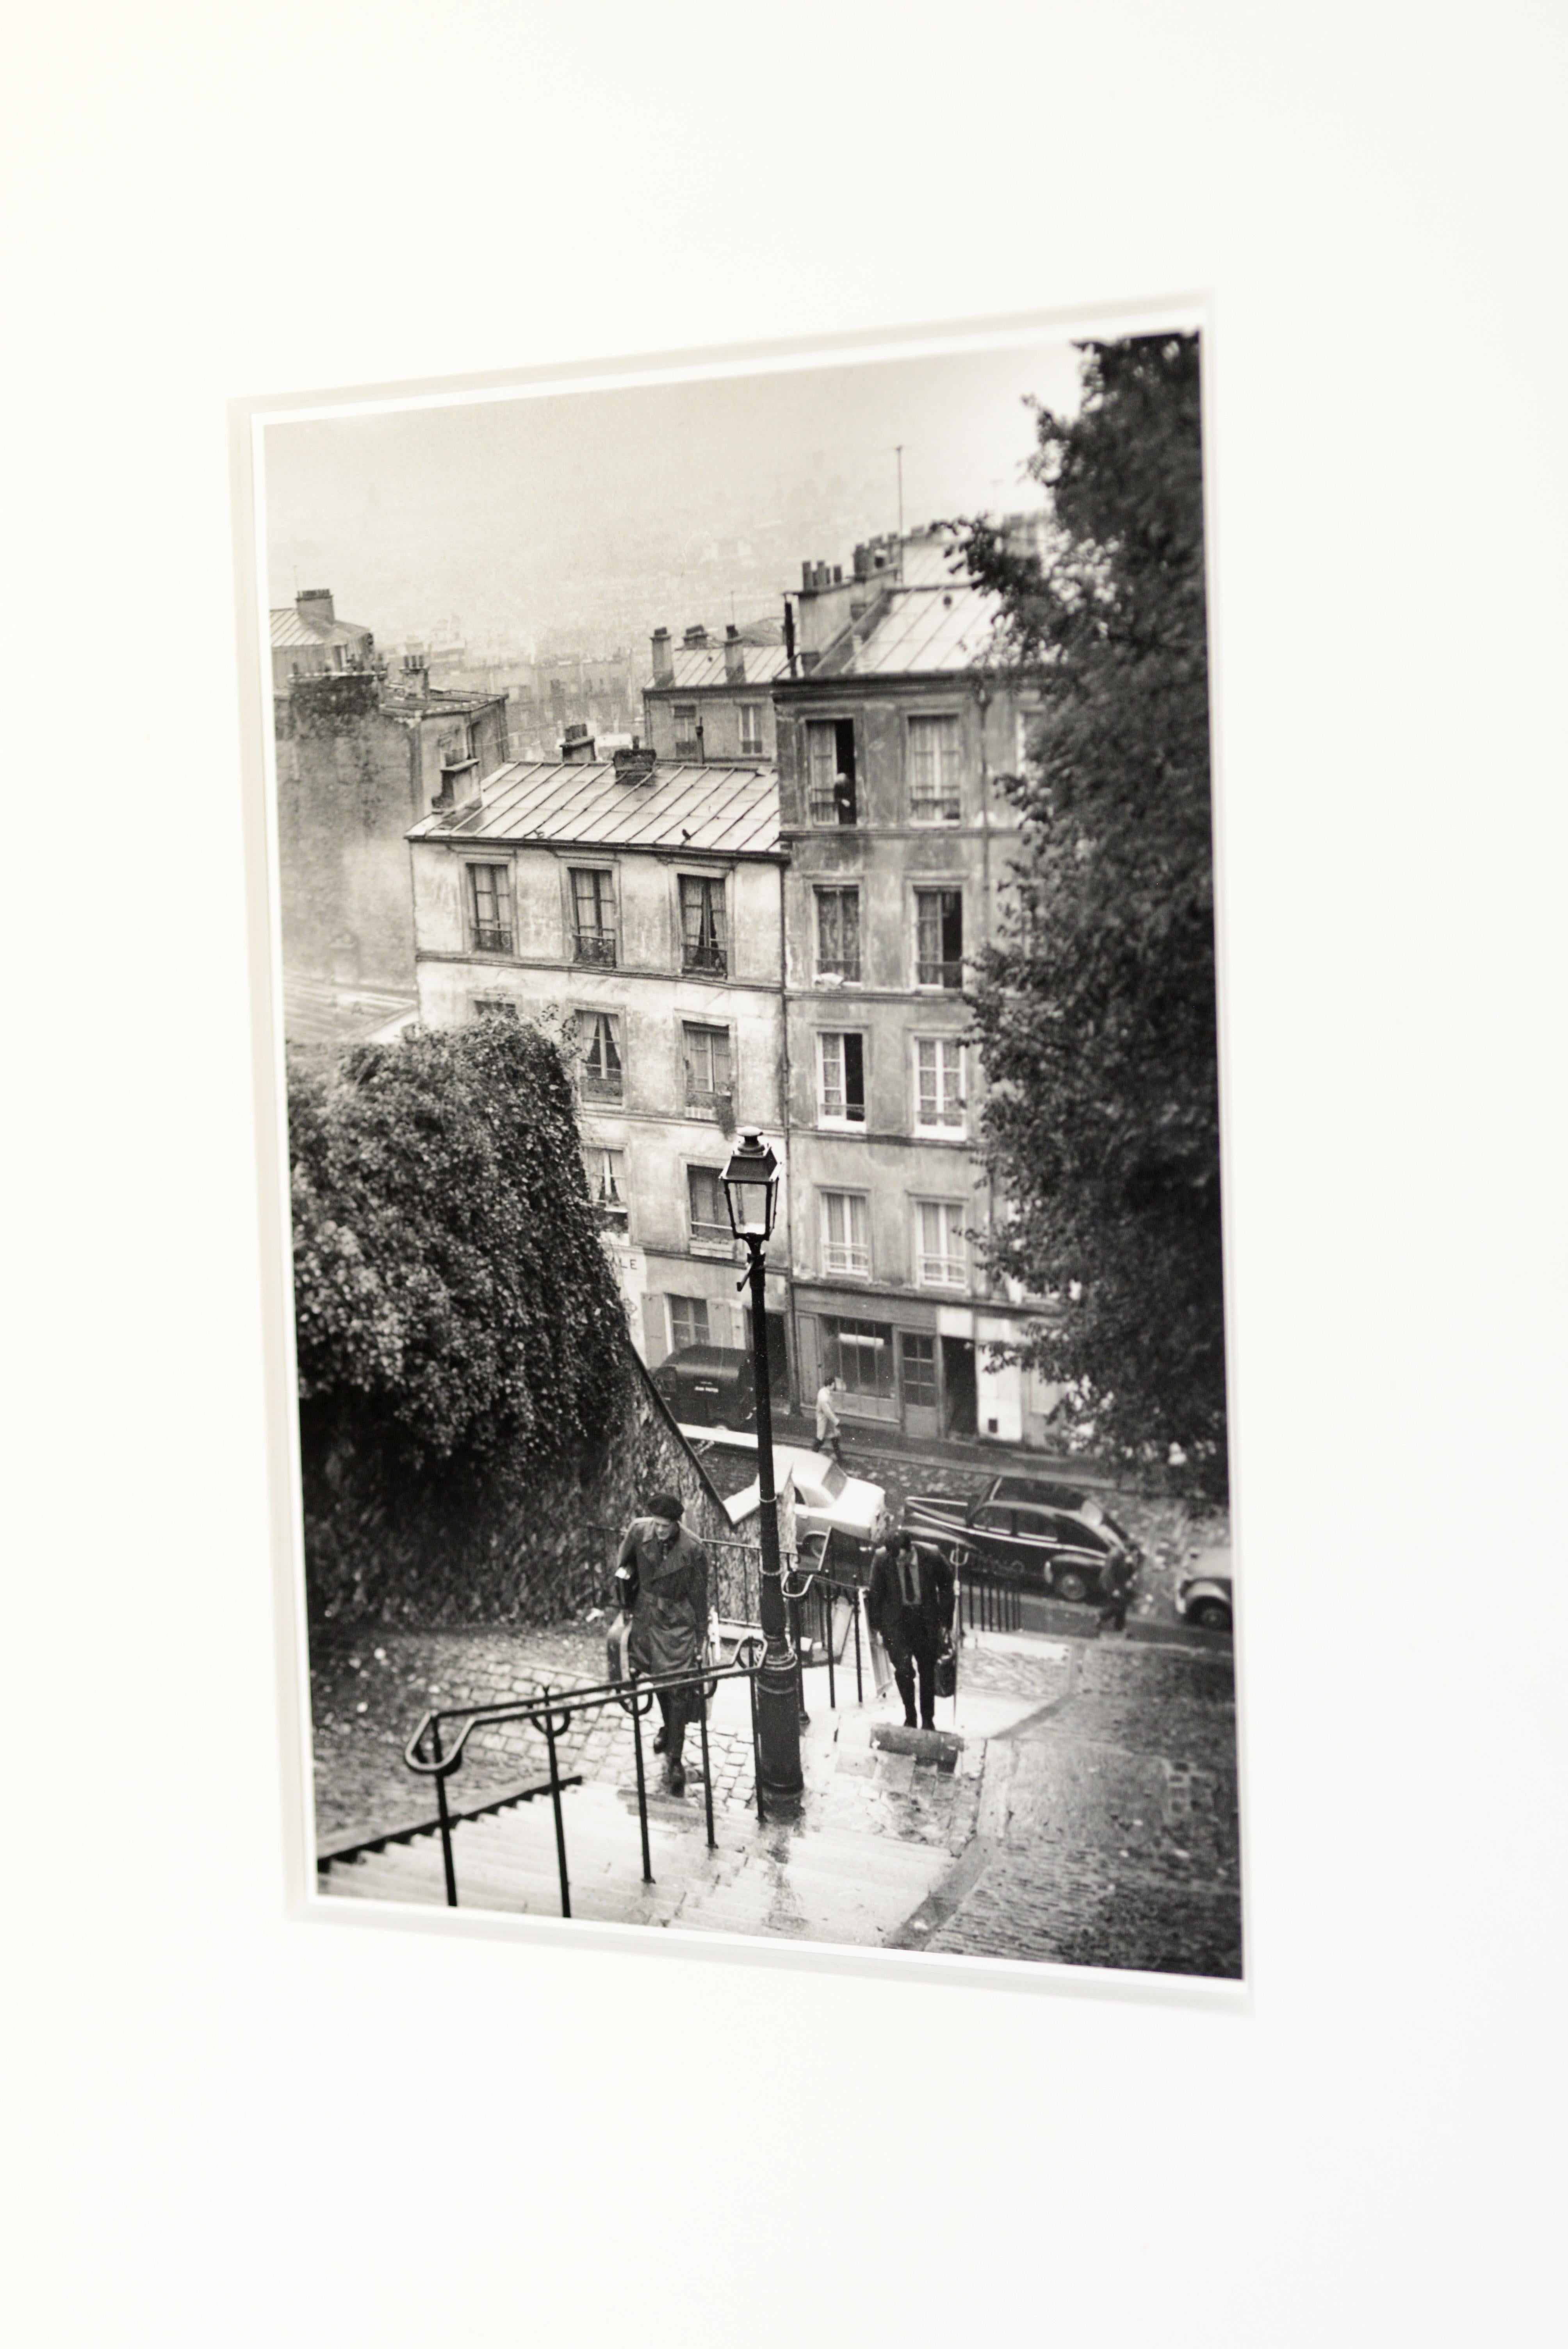 Andre Kertesz (Hungarian/American 1894-1985)
Title: 'Montmarte', Paris, 1963

Gelatin silver print
Signed in ink 
titled, dated '10-31-63' in artists hand in ink au verso
'Corkin Gallery' label au verso
Image size: 8